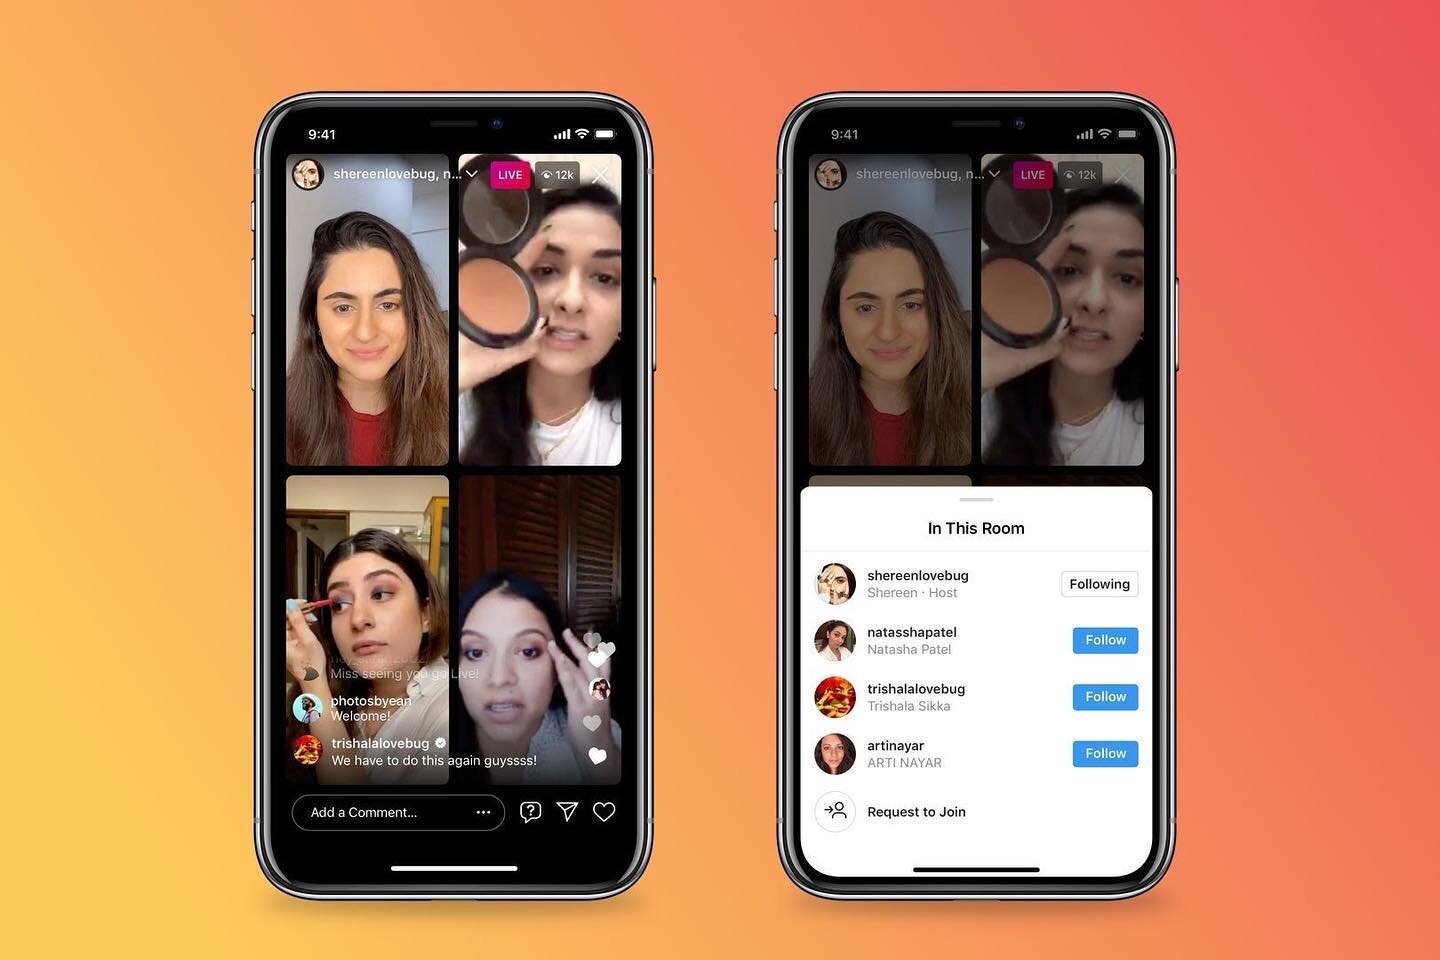 Instagram has launched &lsquo;Live Rooms&rsquo; for live broadcasts with up to four creators.